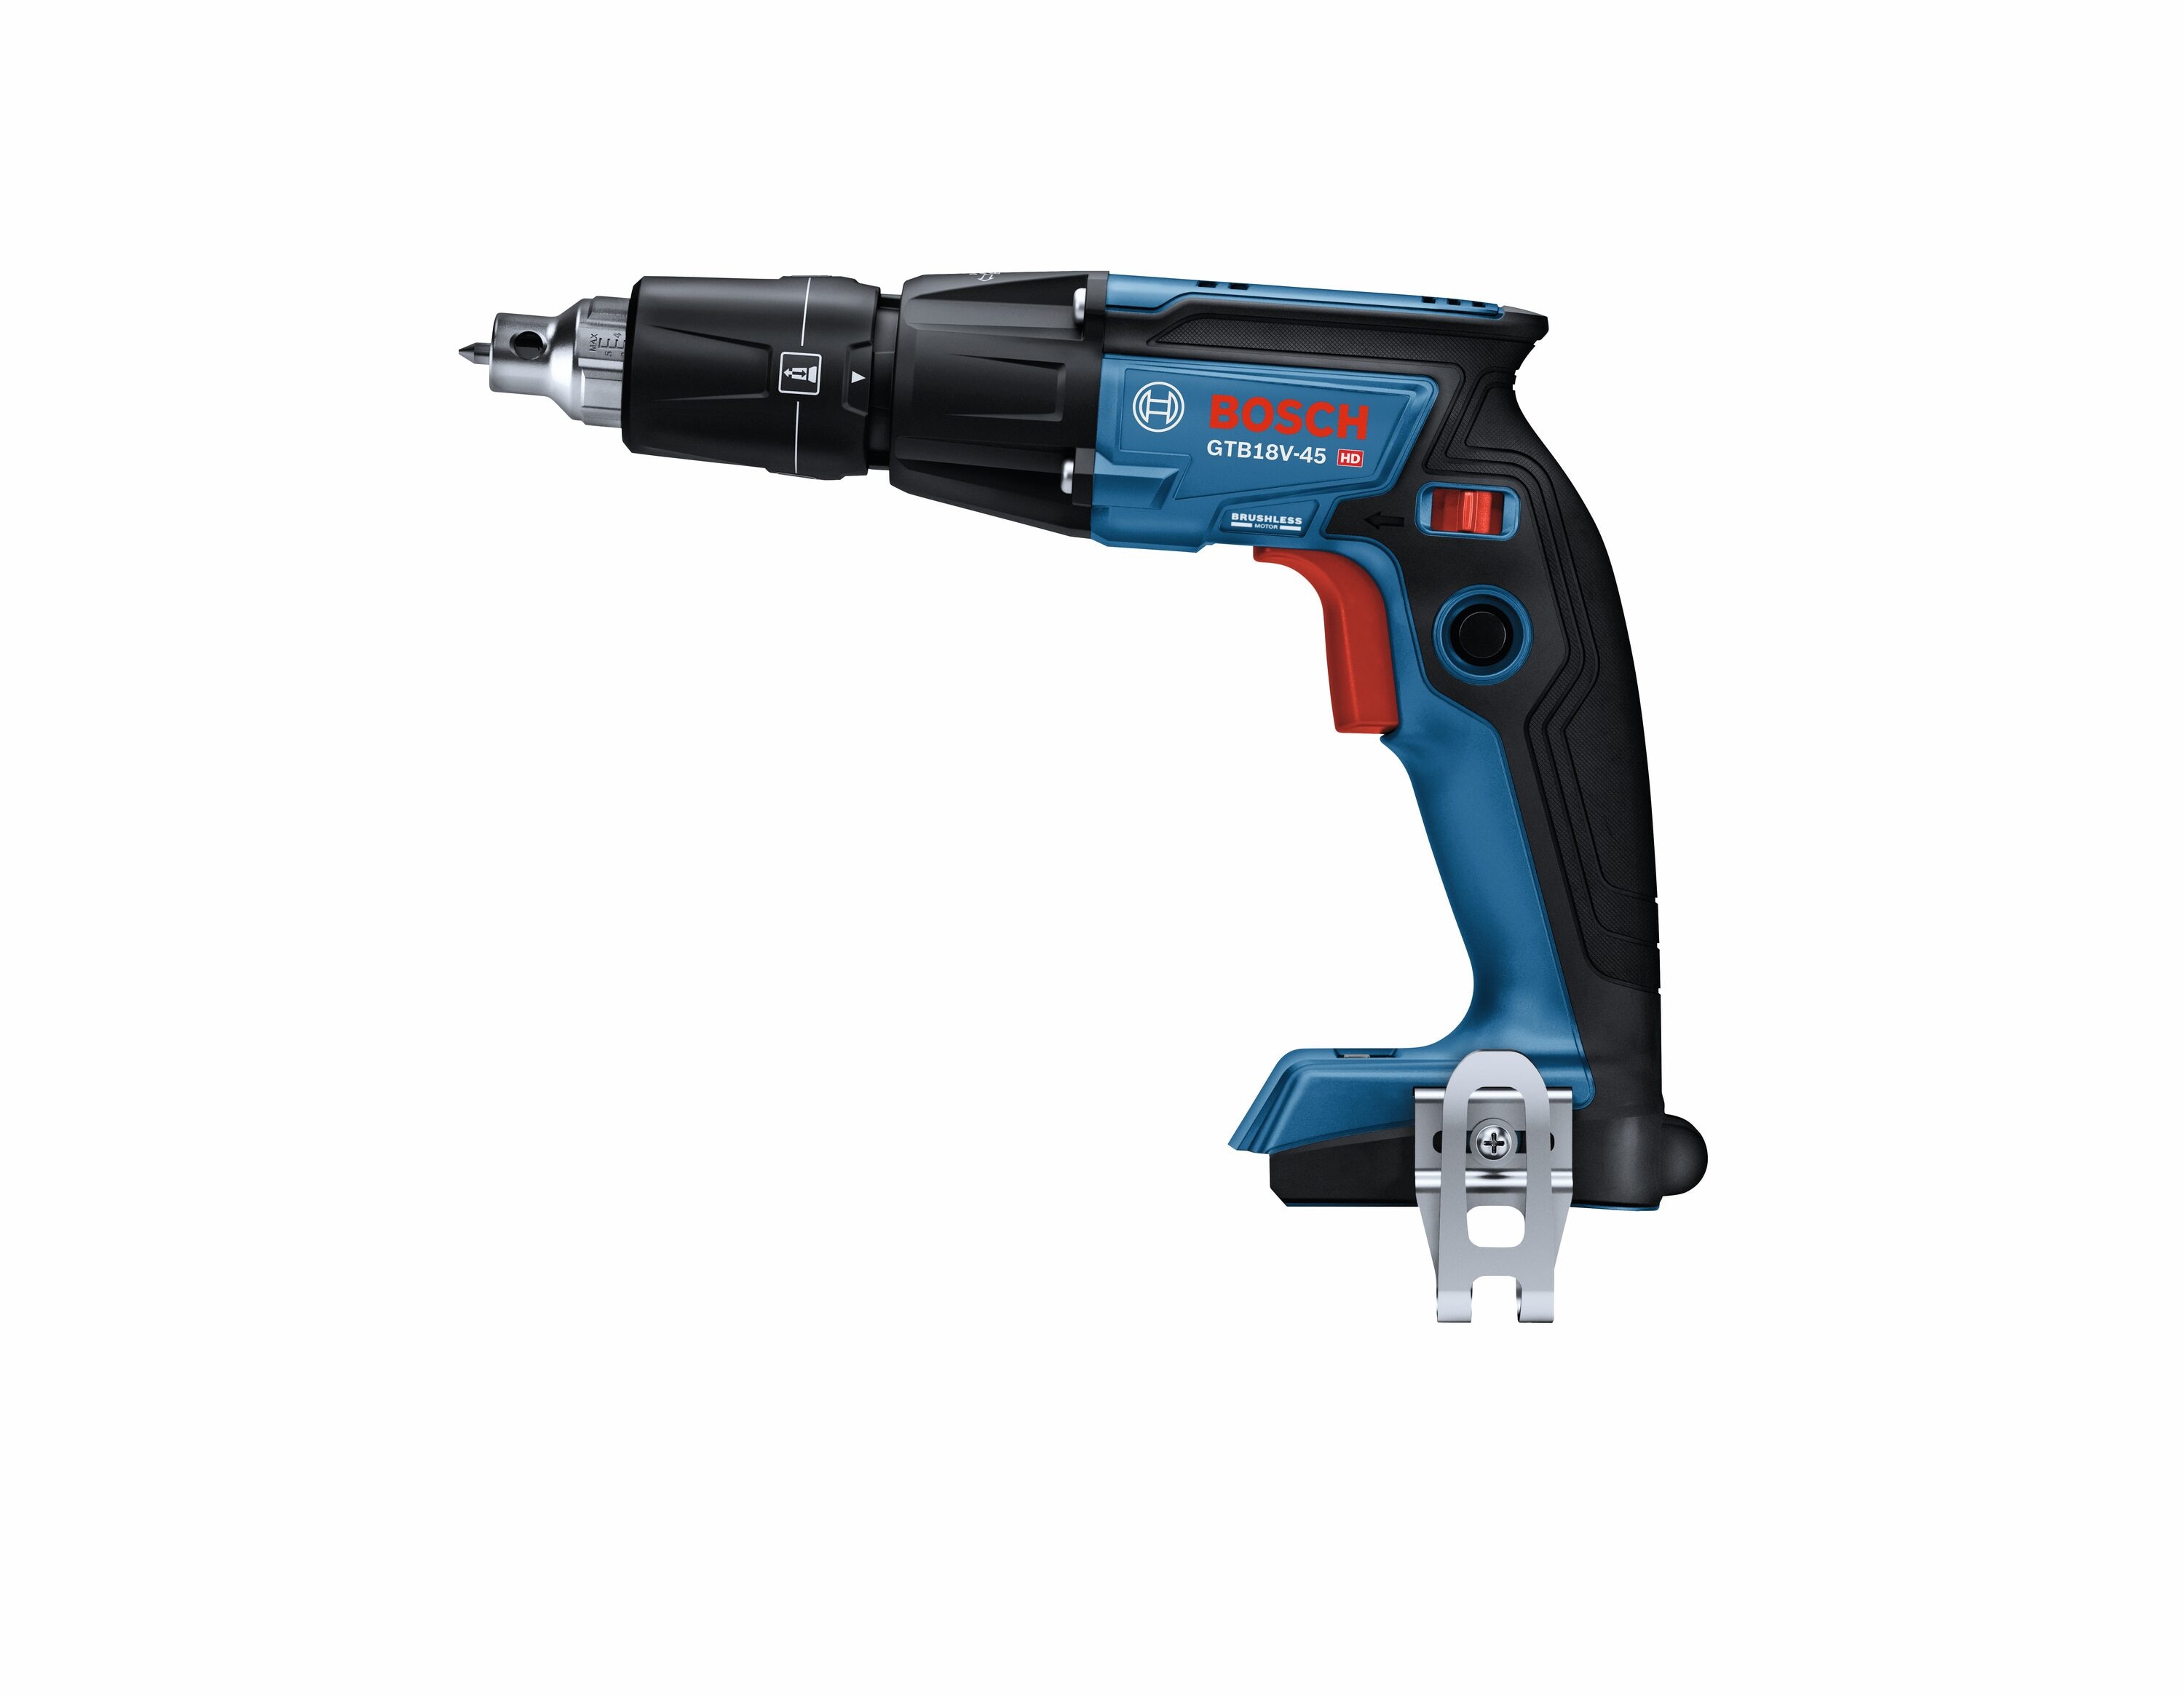 New Bosch Cordless Drywall Tools & Free Starter Kit Deal at Lowe's